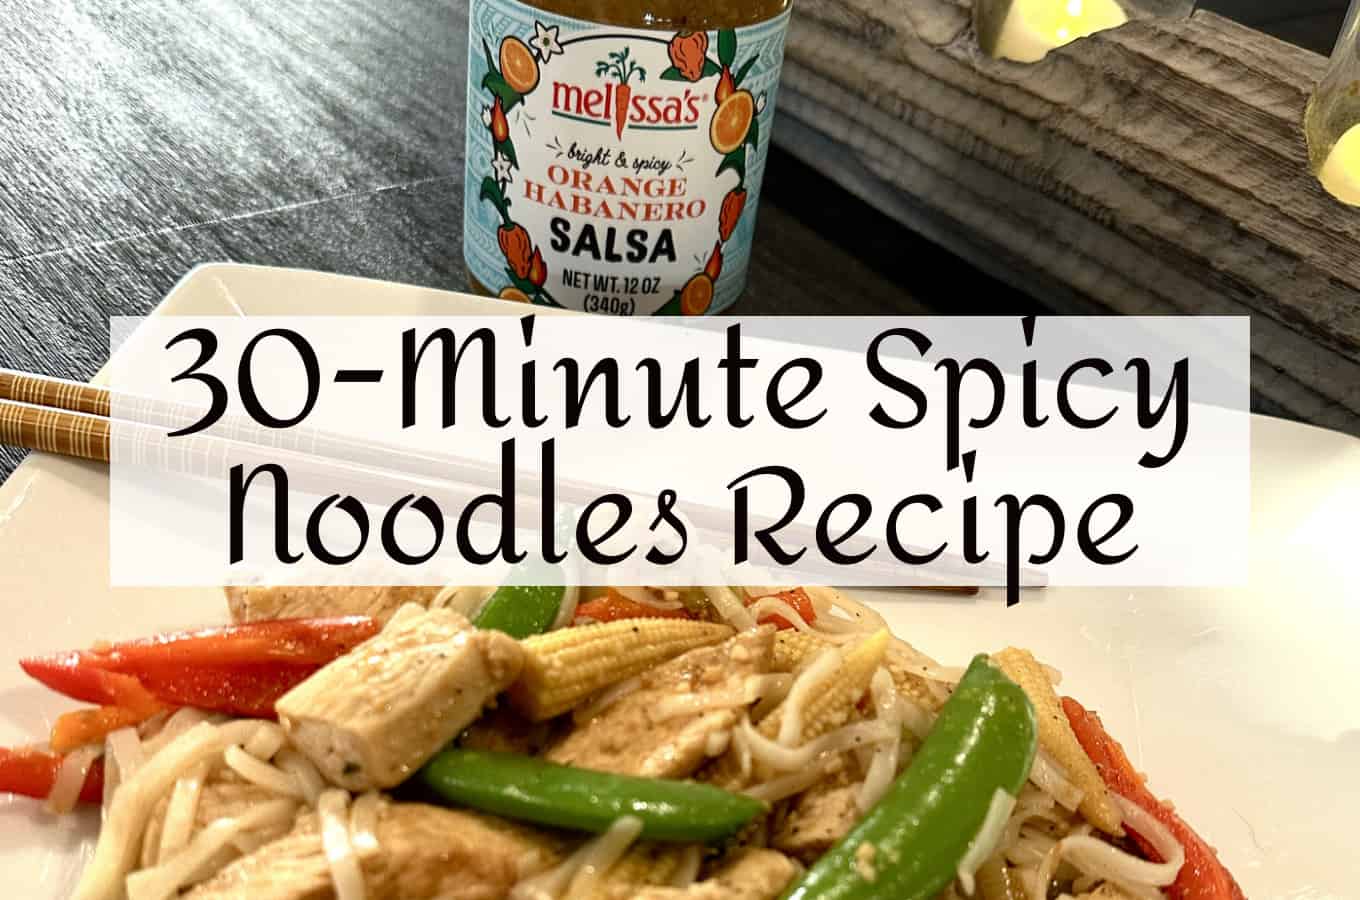 New Spicy Noodles Recipe for Dinner in Only 30 Minutes